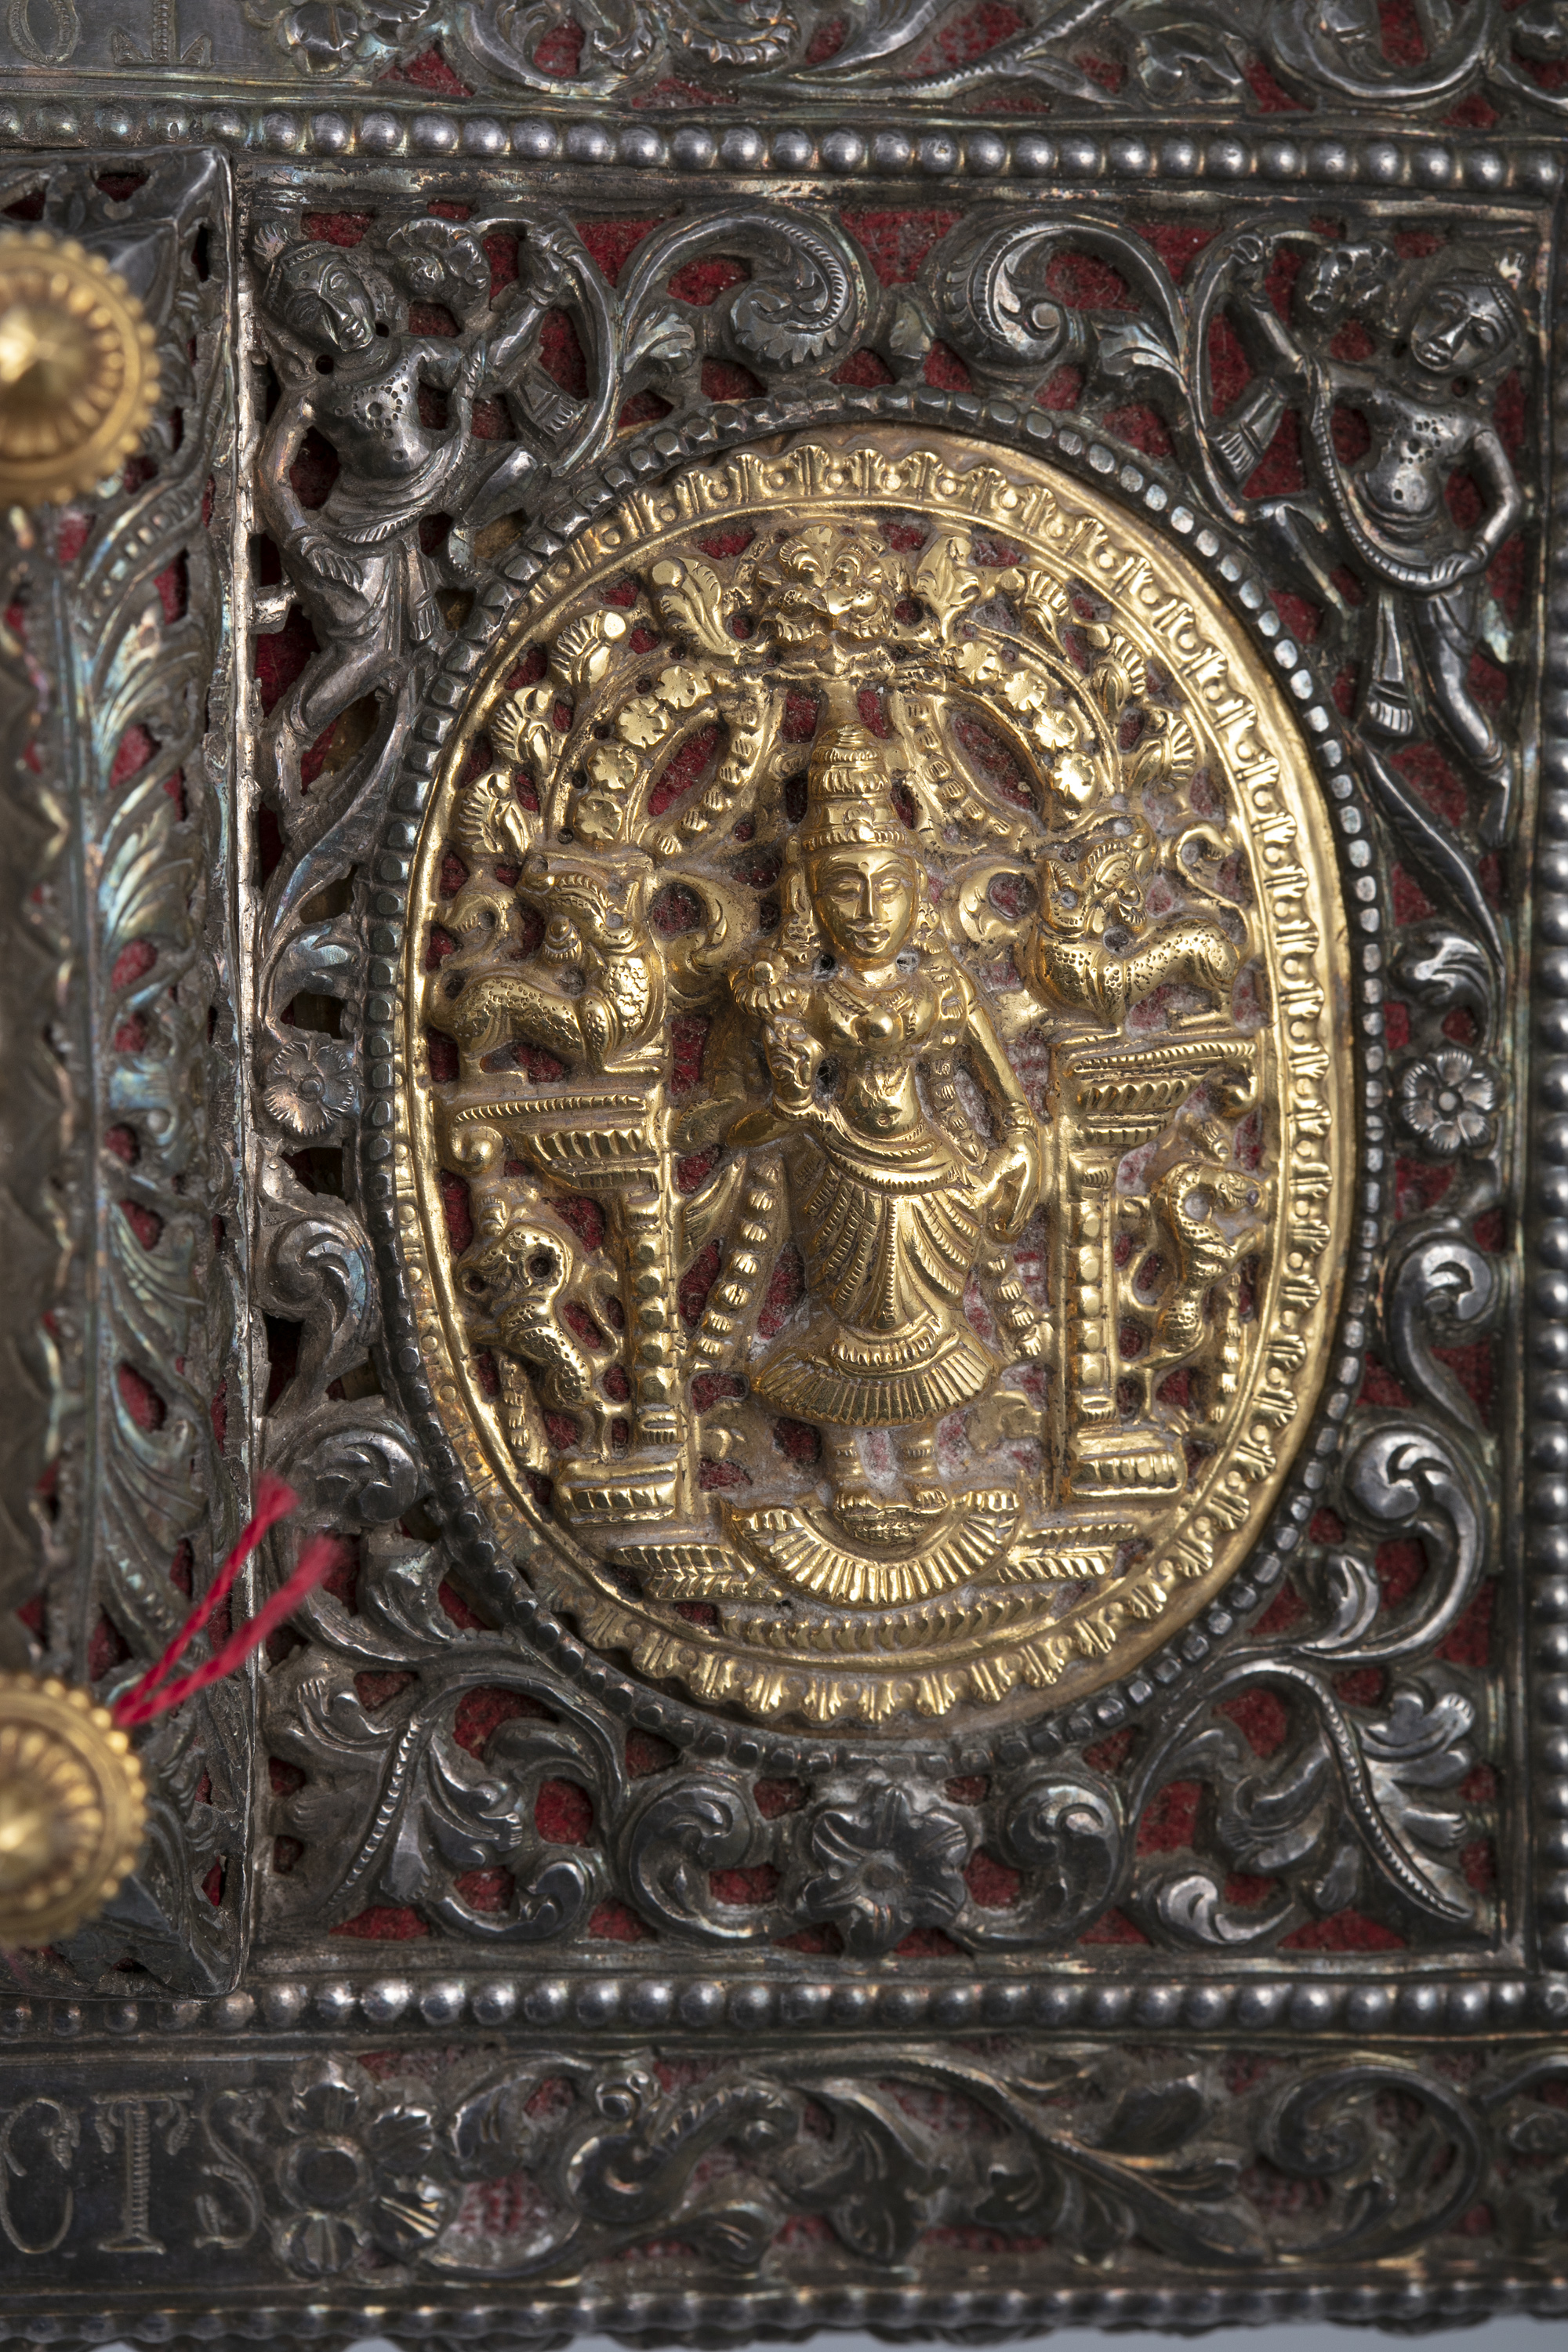 A UNIQUE AND IMPORTANT GOLD, SILVER AND FABRIC EMBELLISHED TEMPLE-SHAPED CEREMONIAL BOX GIFTED TO - Image 3 of 6